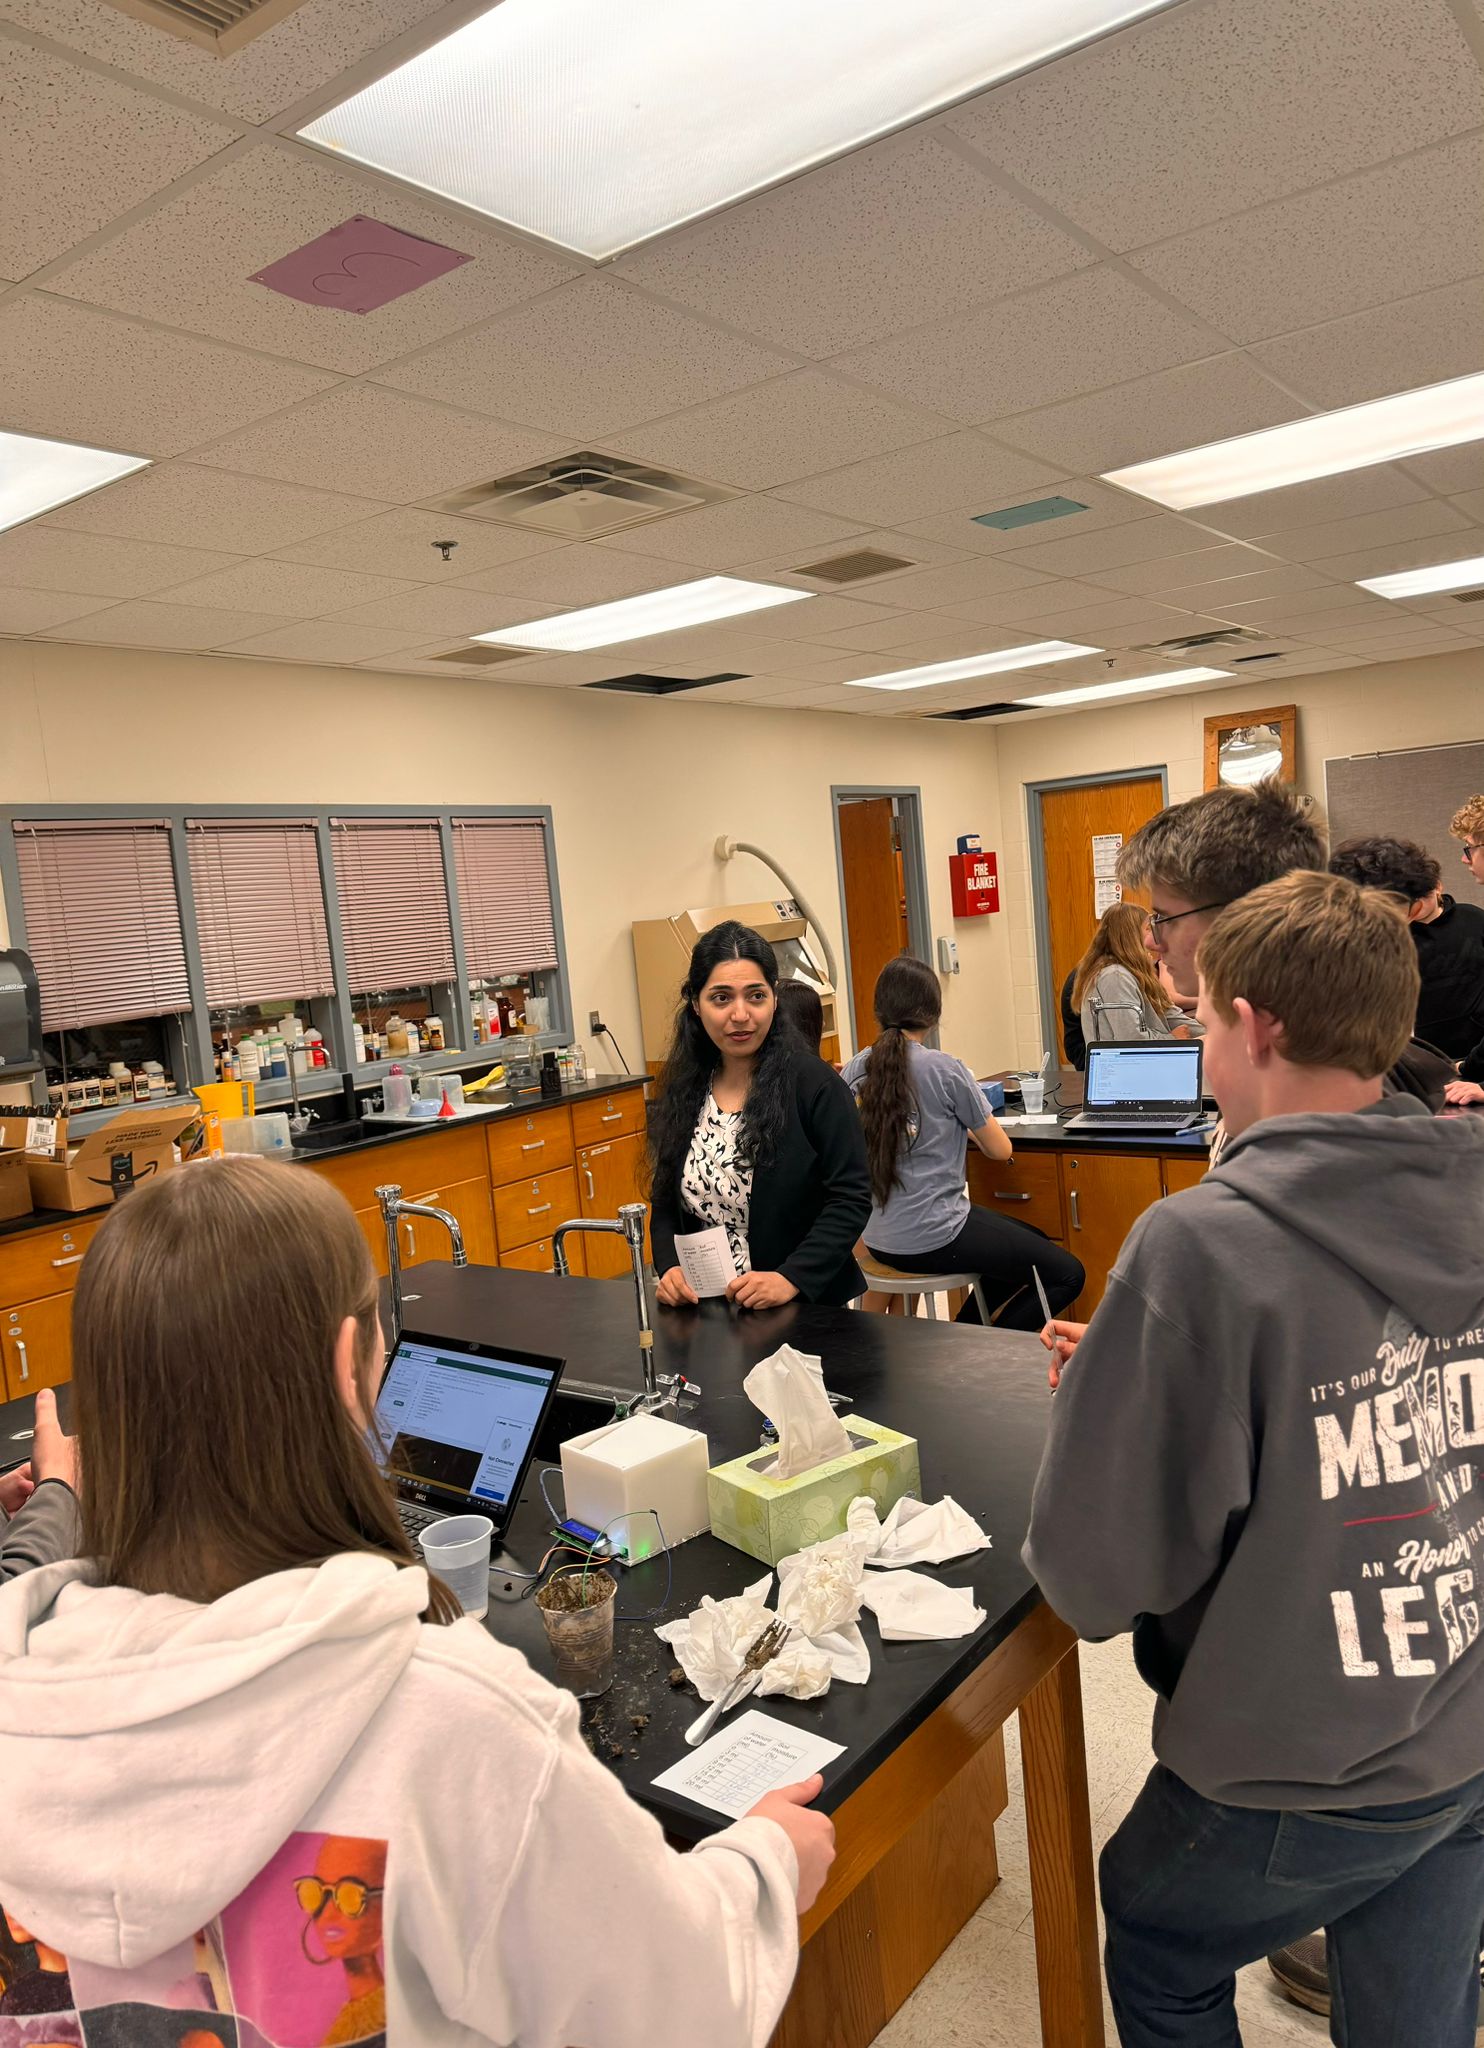 Graduate student Samereh Soleimani (shown in picture), is working on increasing the interest of high school students through a STEM outreach. They were tasked to work with an automated soil moisture sensor to determine the amount of moisture in the soil.